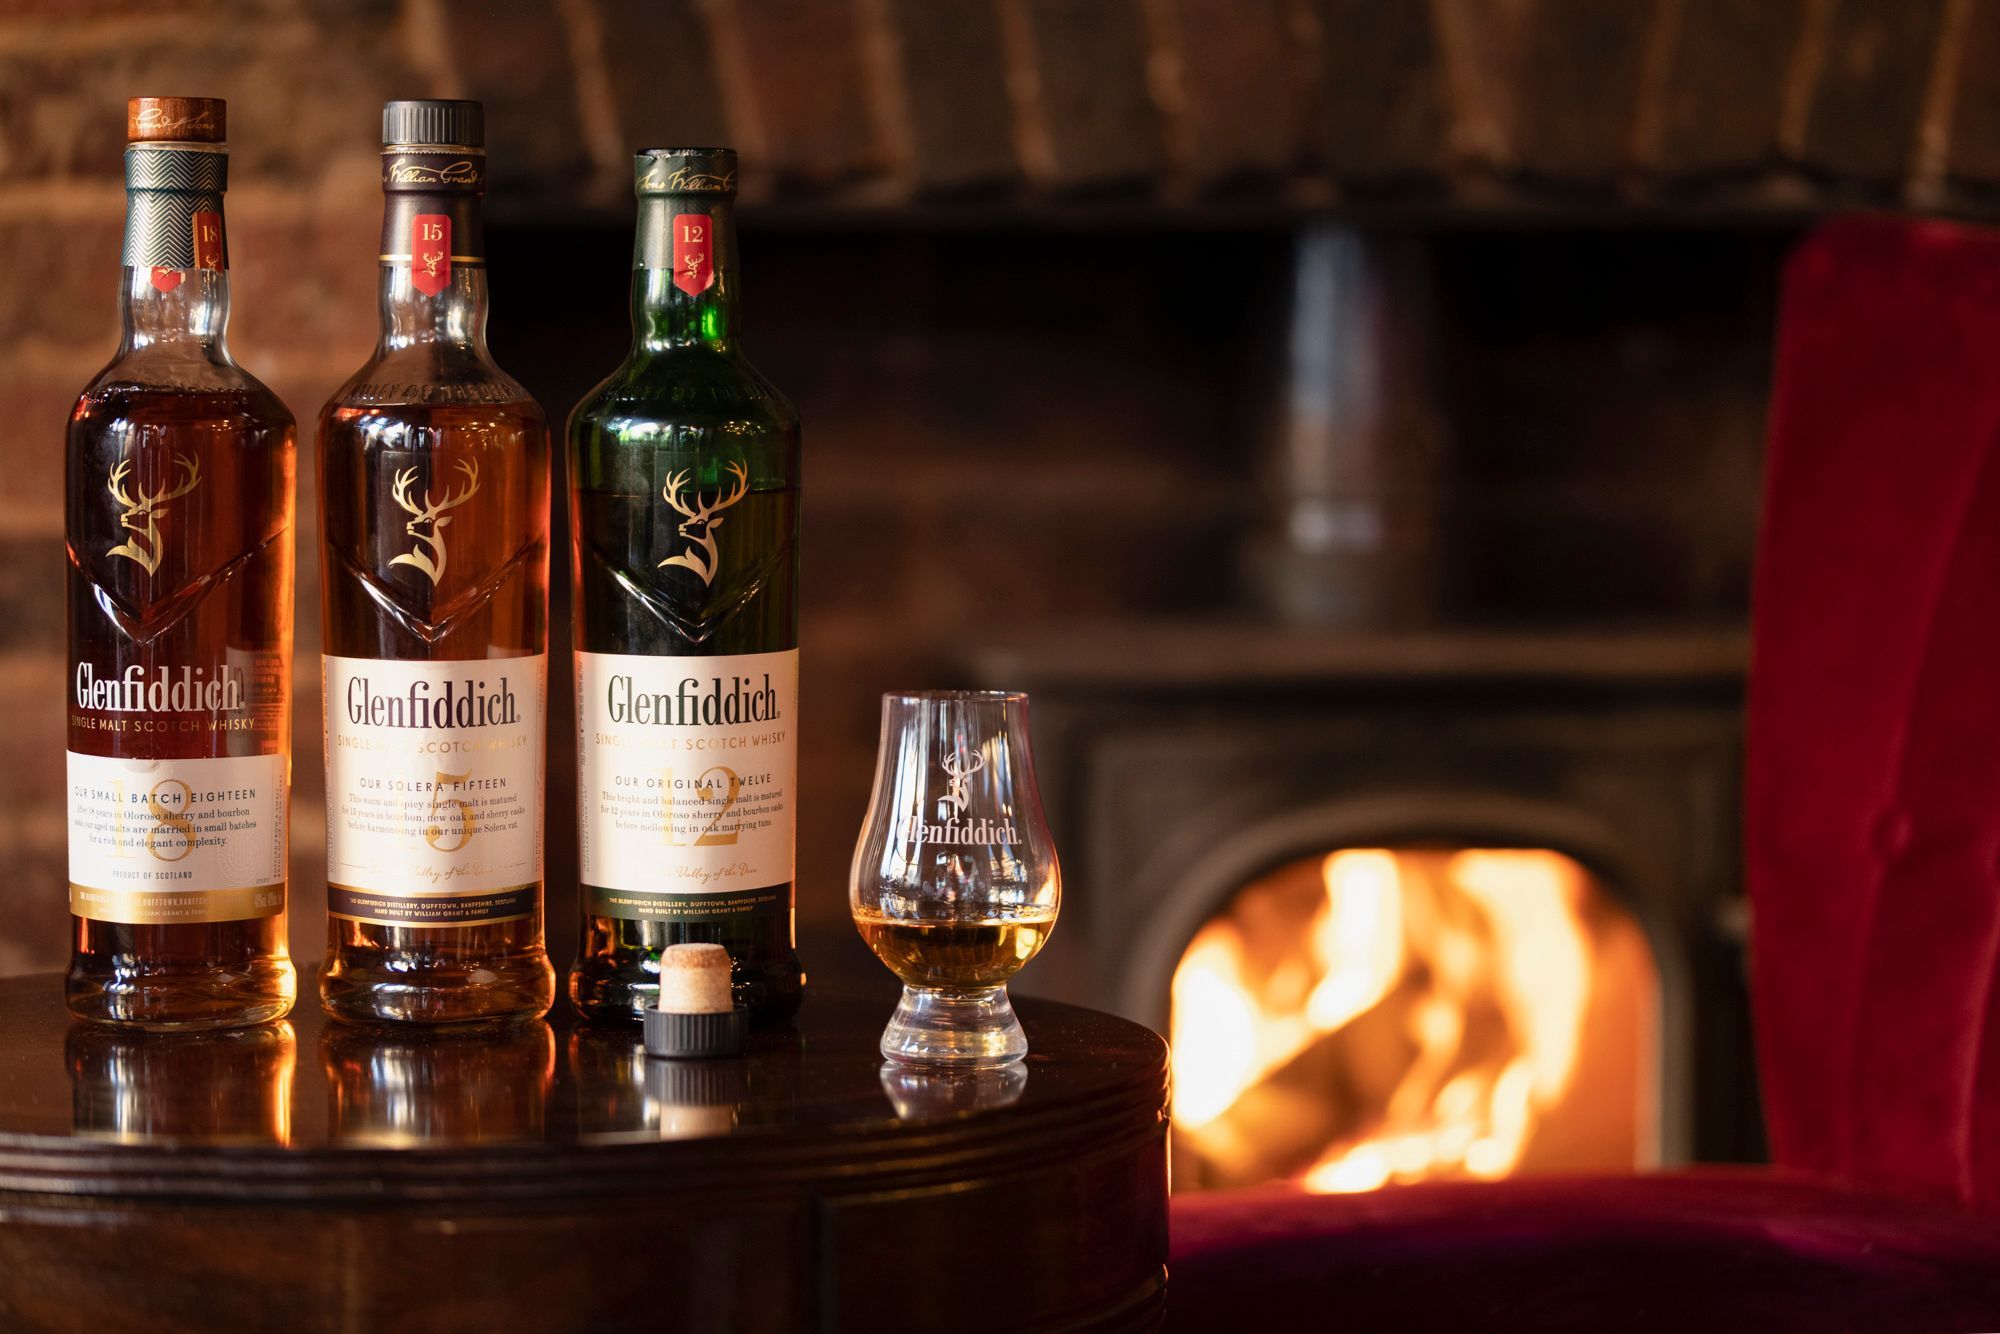 three bottles scotch whiskey on the table next to fire place